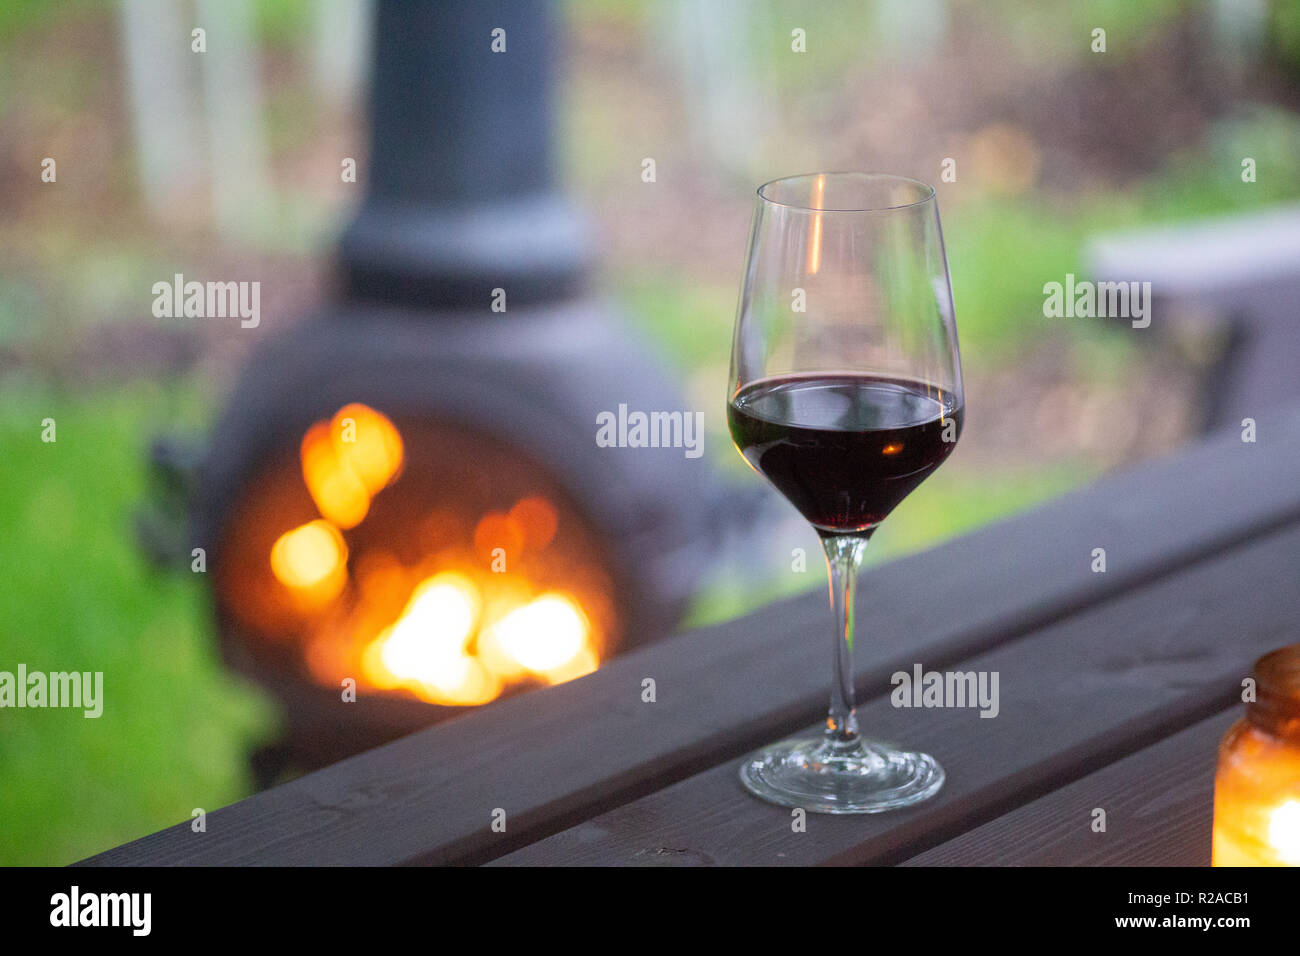 Glass of red wine by a warm cosy fire Stock Photo